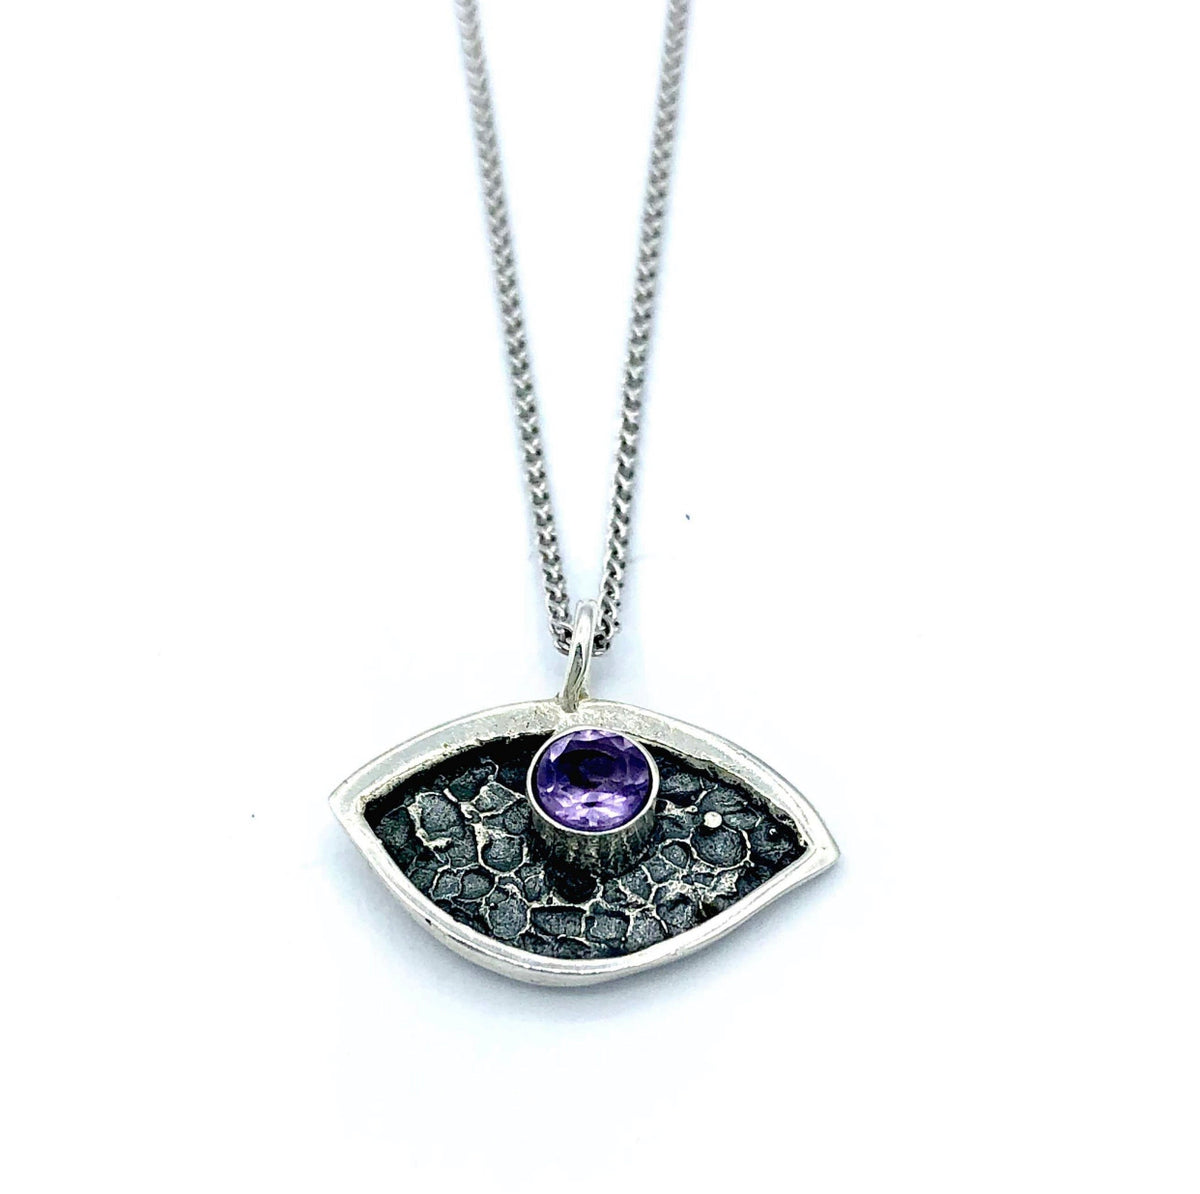 evil eye necklace with amethyst